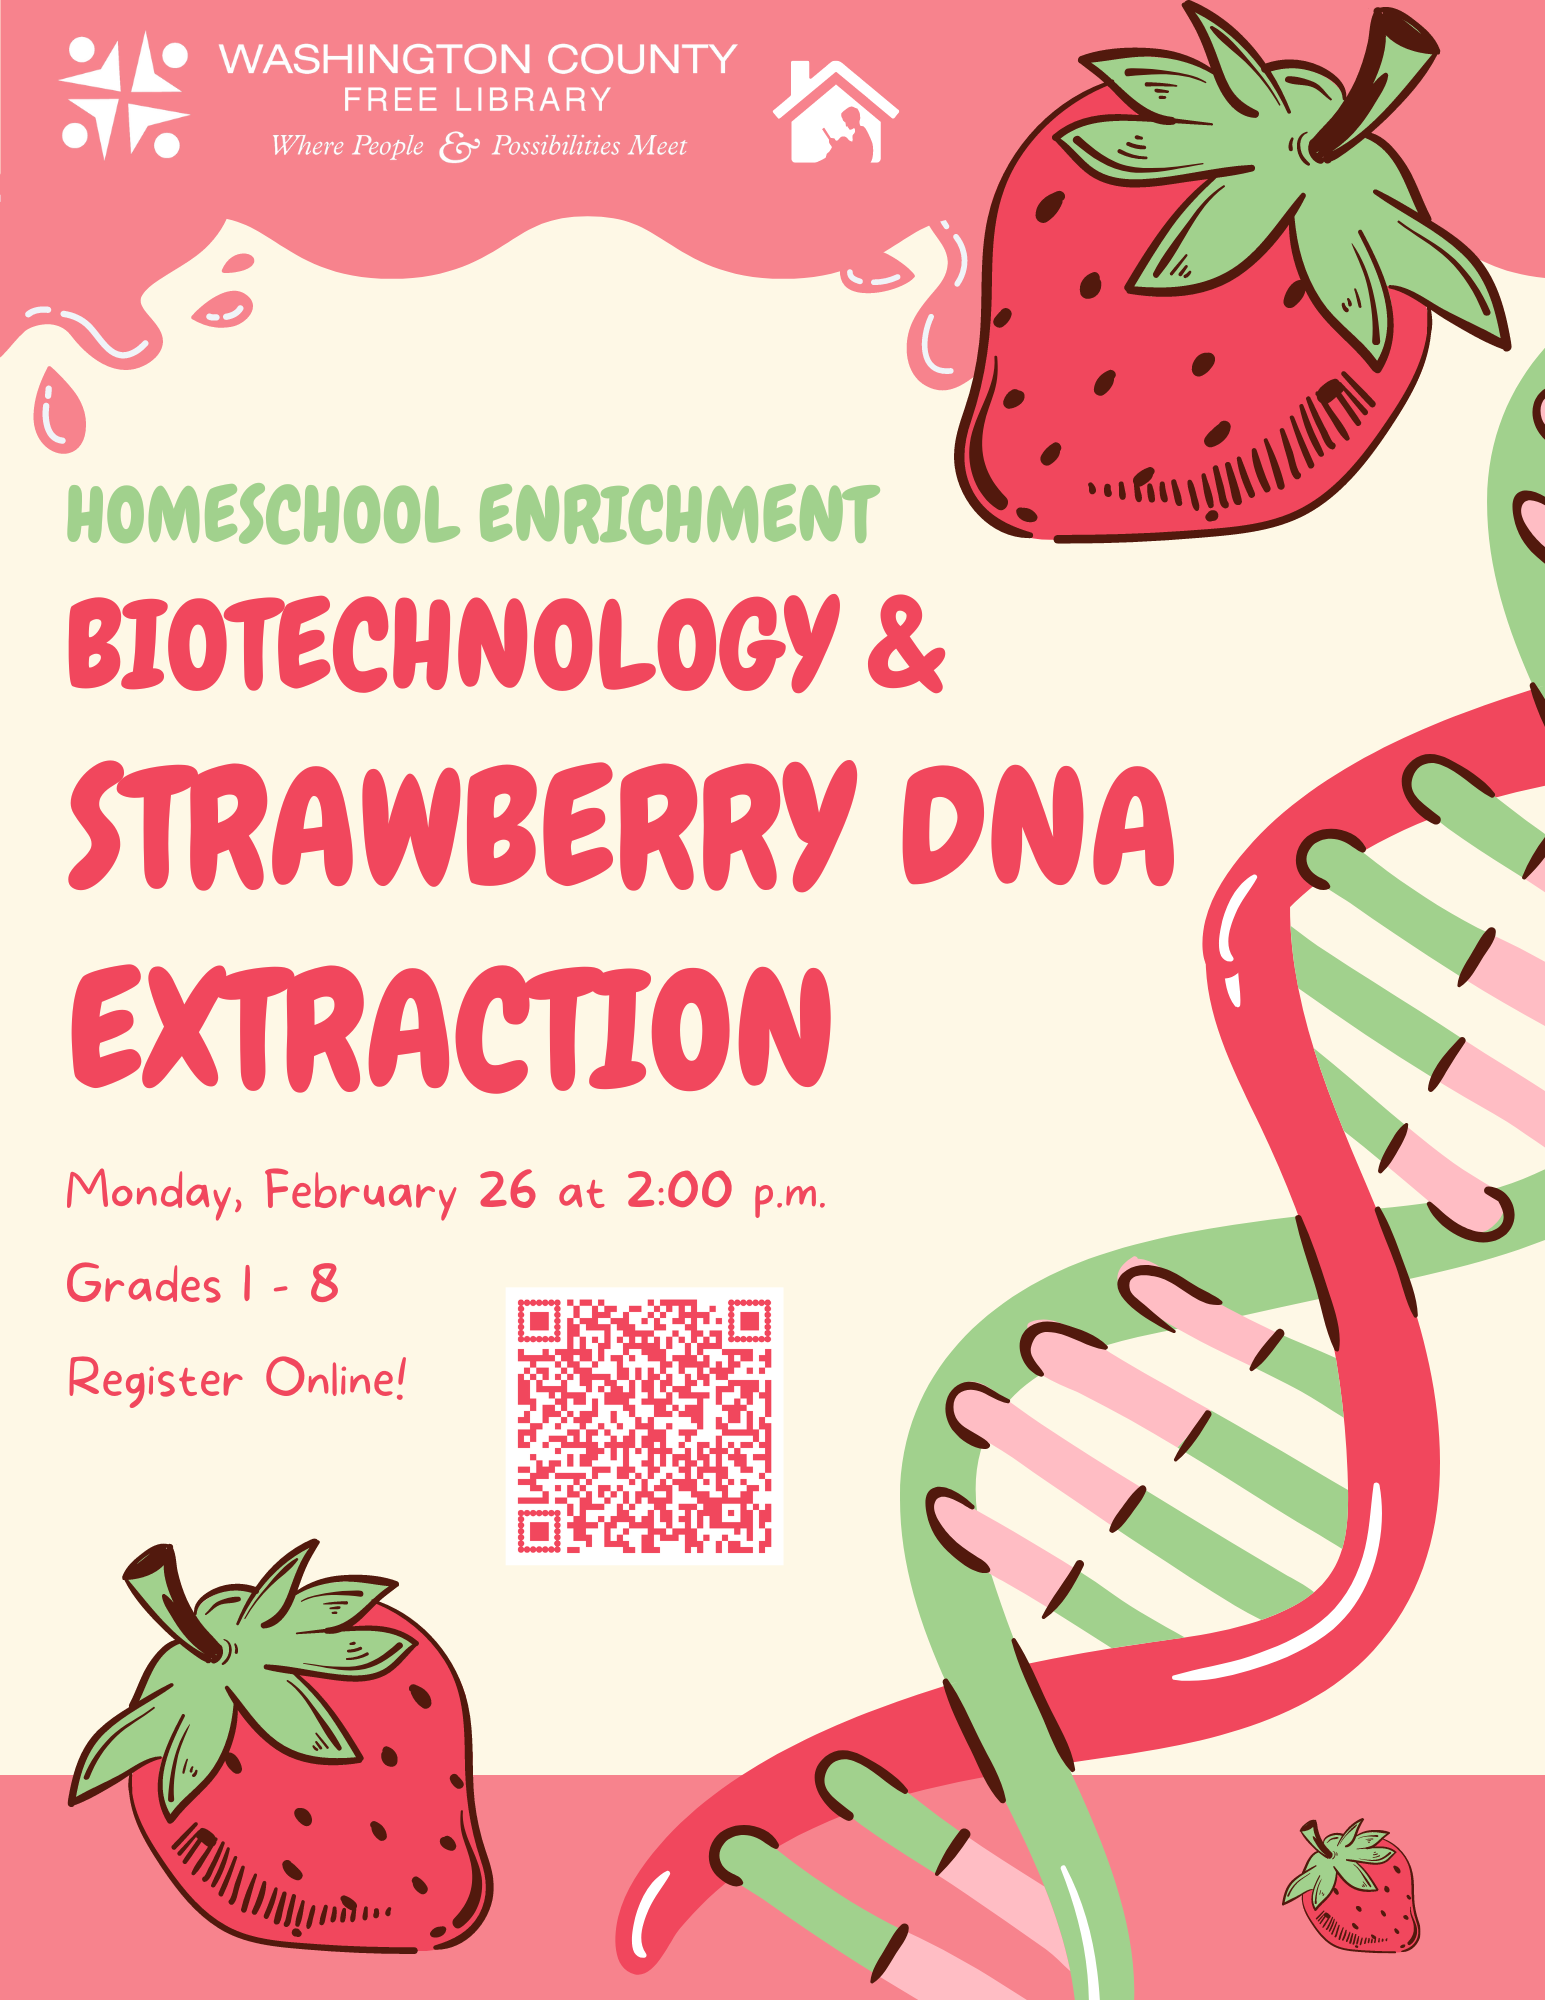 Biotech and Strawberry DNA Extraction, Feburary 26 at 3:15 p.m. Register online